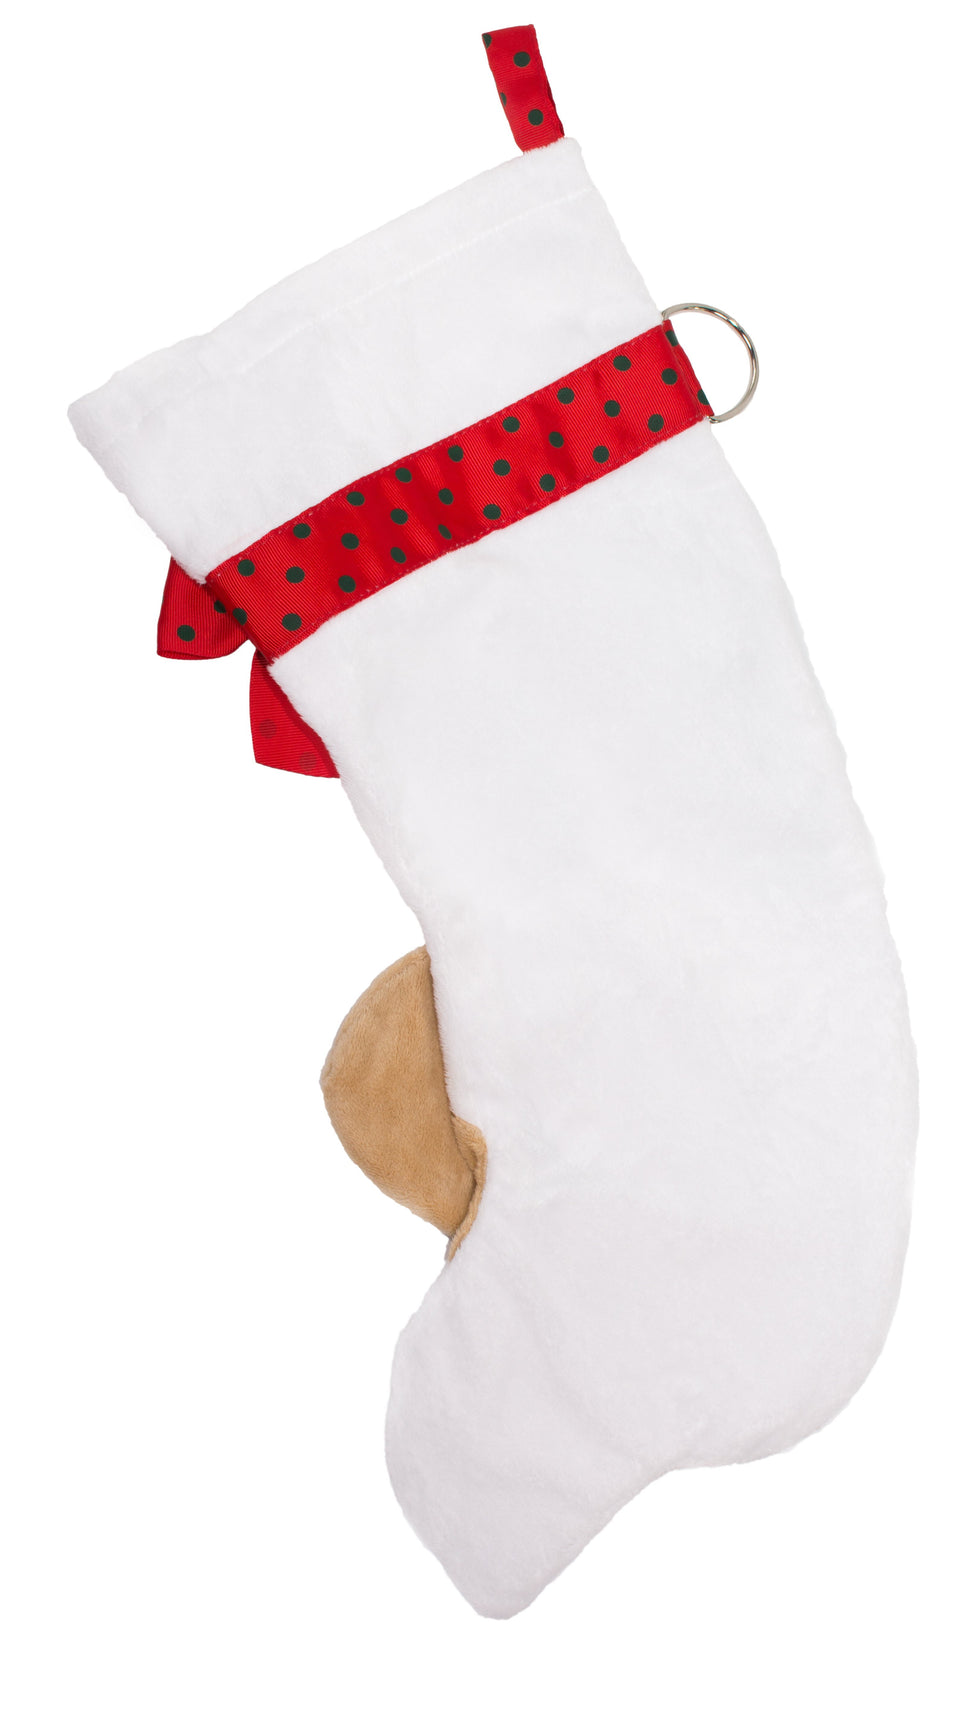 This Beagle shaped dog Christmas stocking is the perfect gift for stuffing toys and treats into to spoil your fur baby for Christmas, or whatever holiday you celebrate!